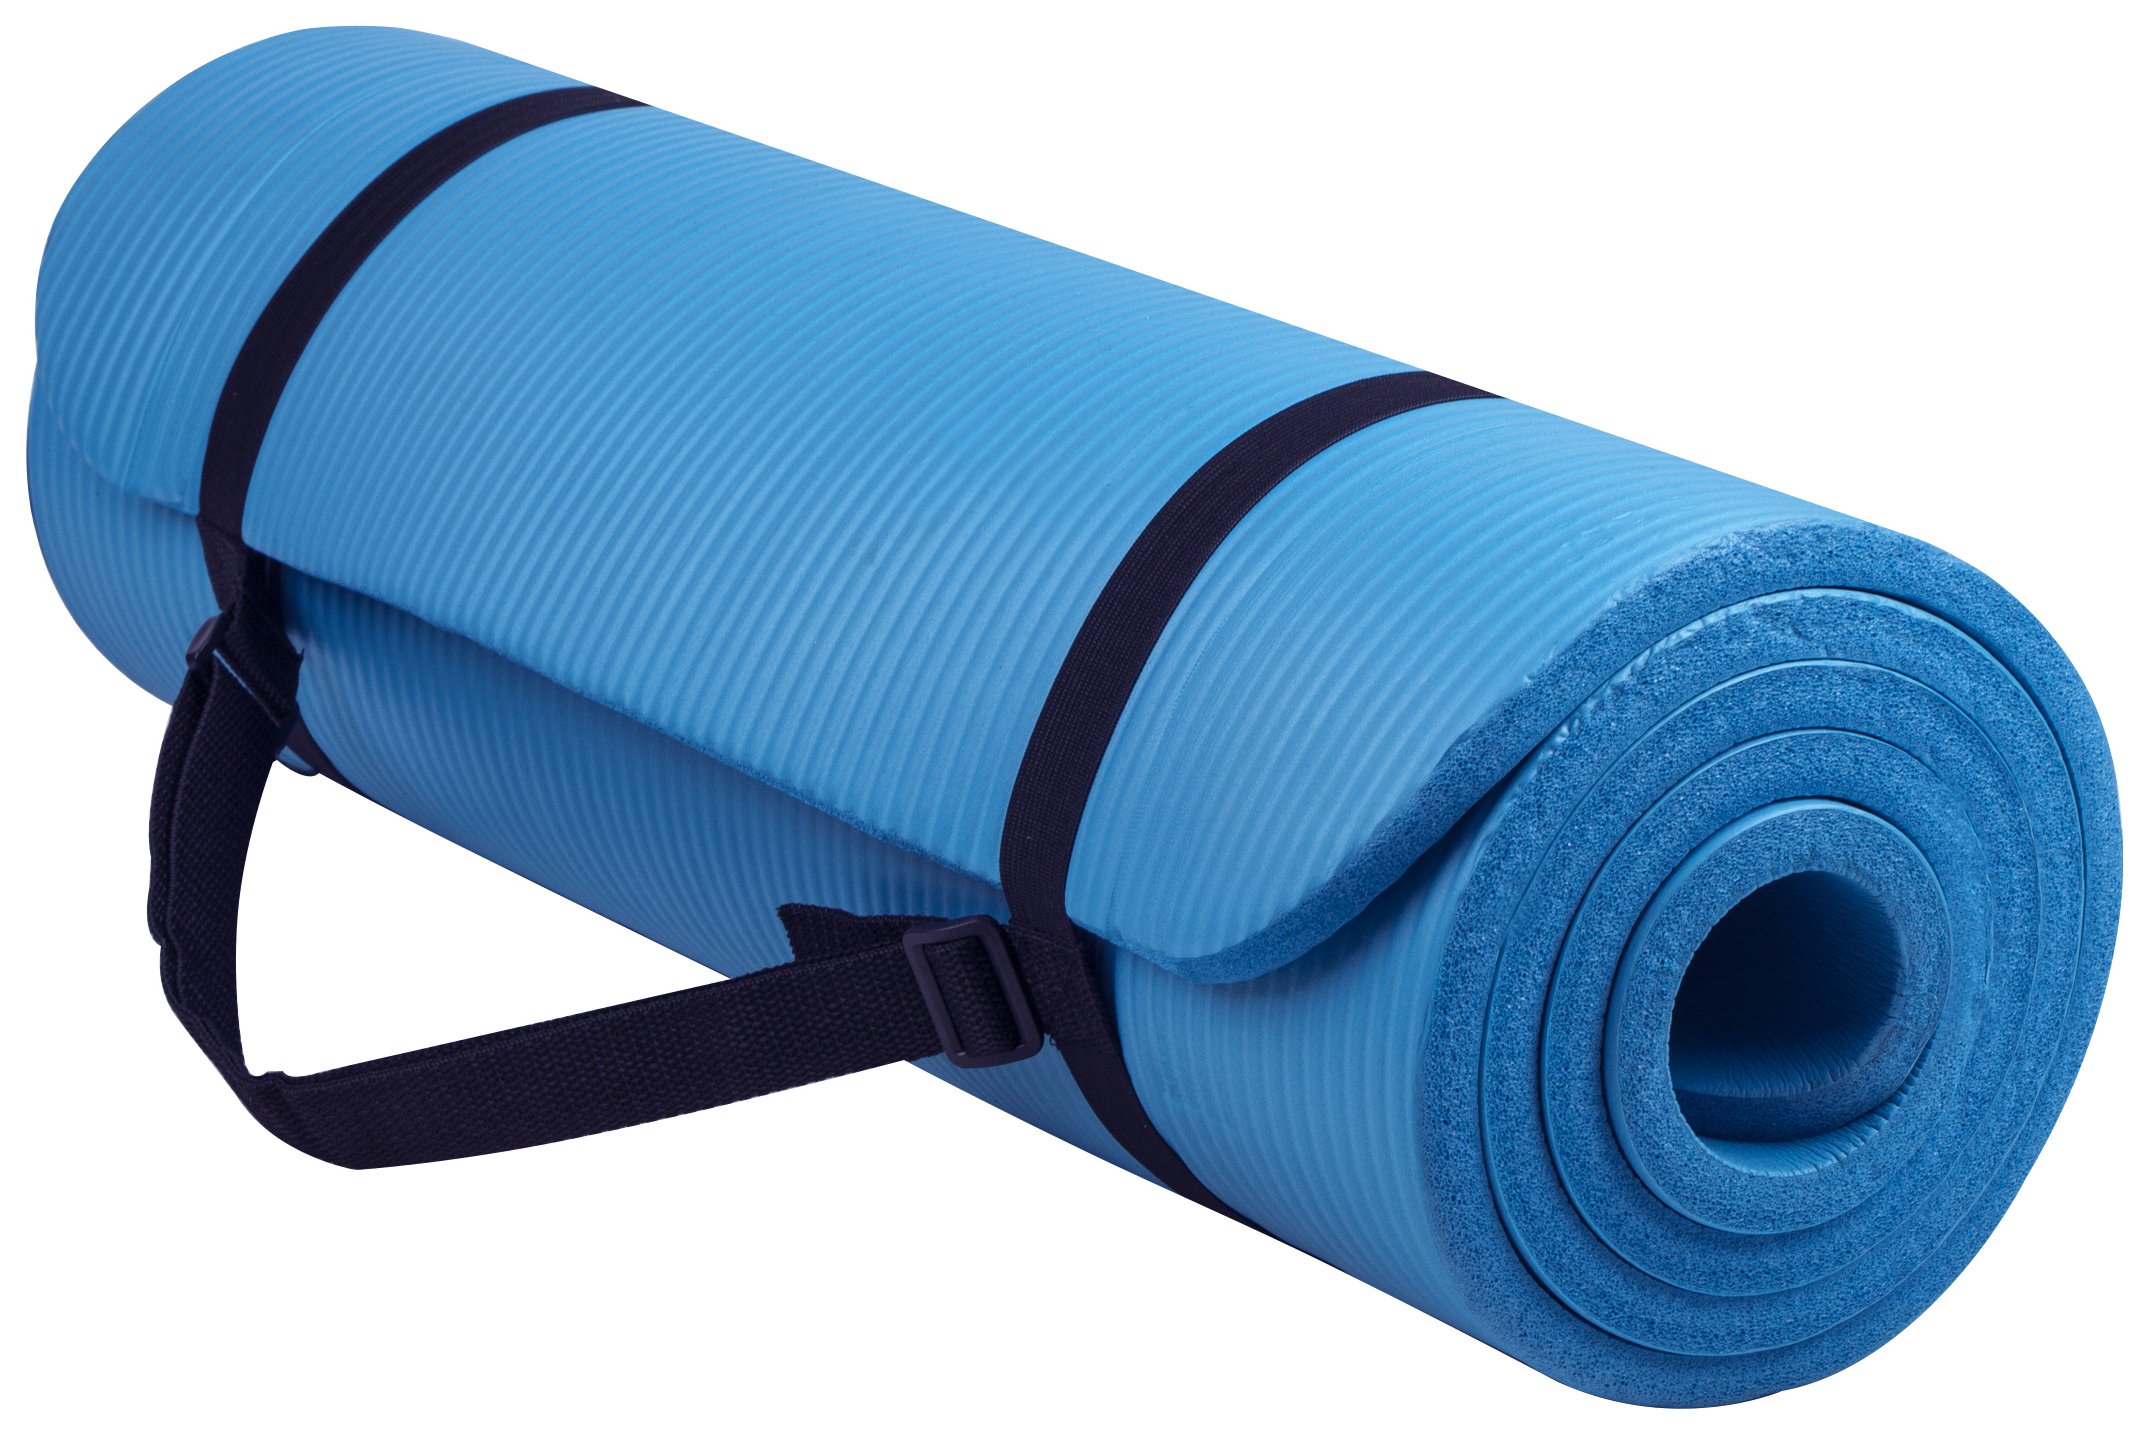 BalanceFrom Balance From go Yoga All Purpose Anti-Tear Exercise Yoga Mat with carrying Strap, Blue (BFgY-AP6BL), 71 x 24 x 0.5 inches